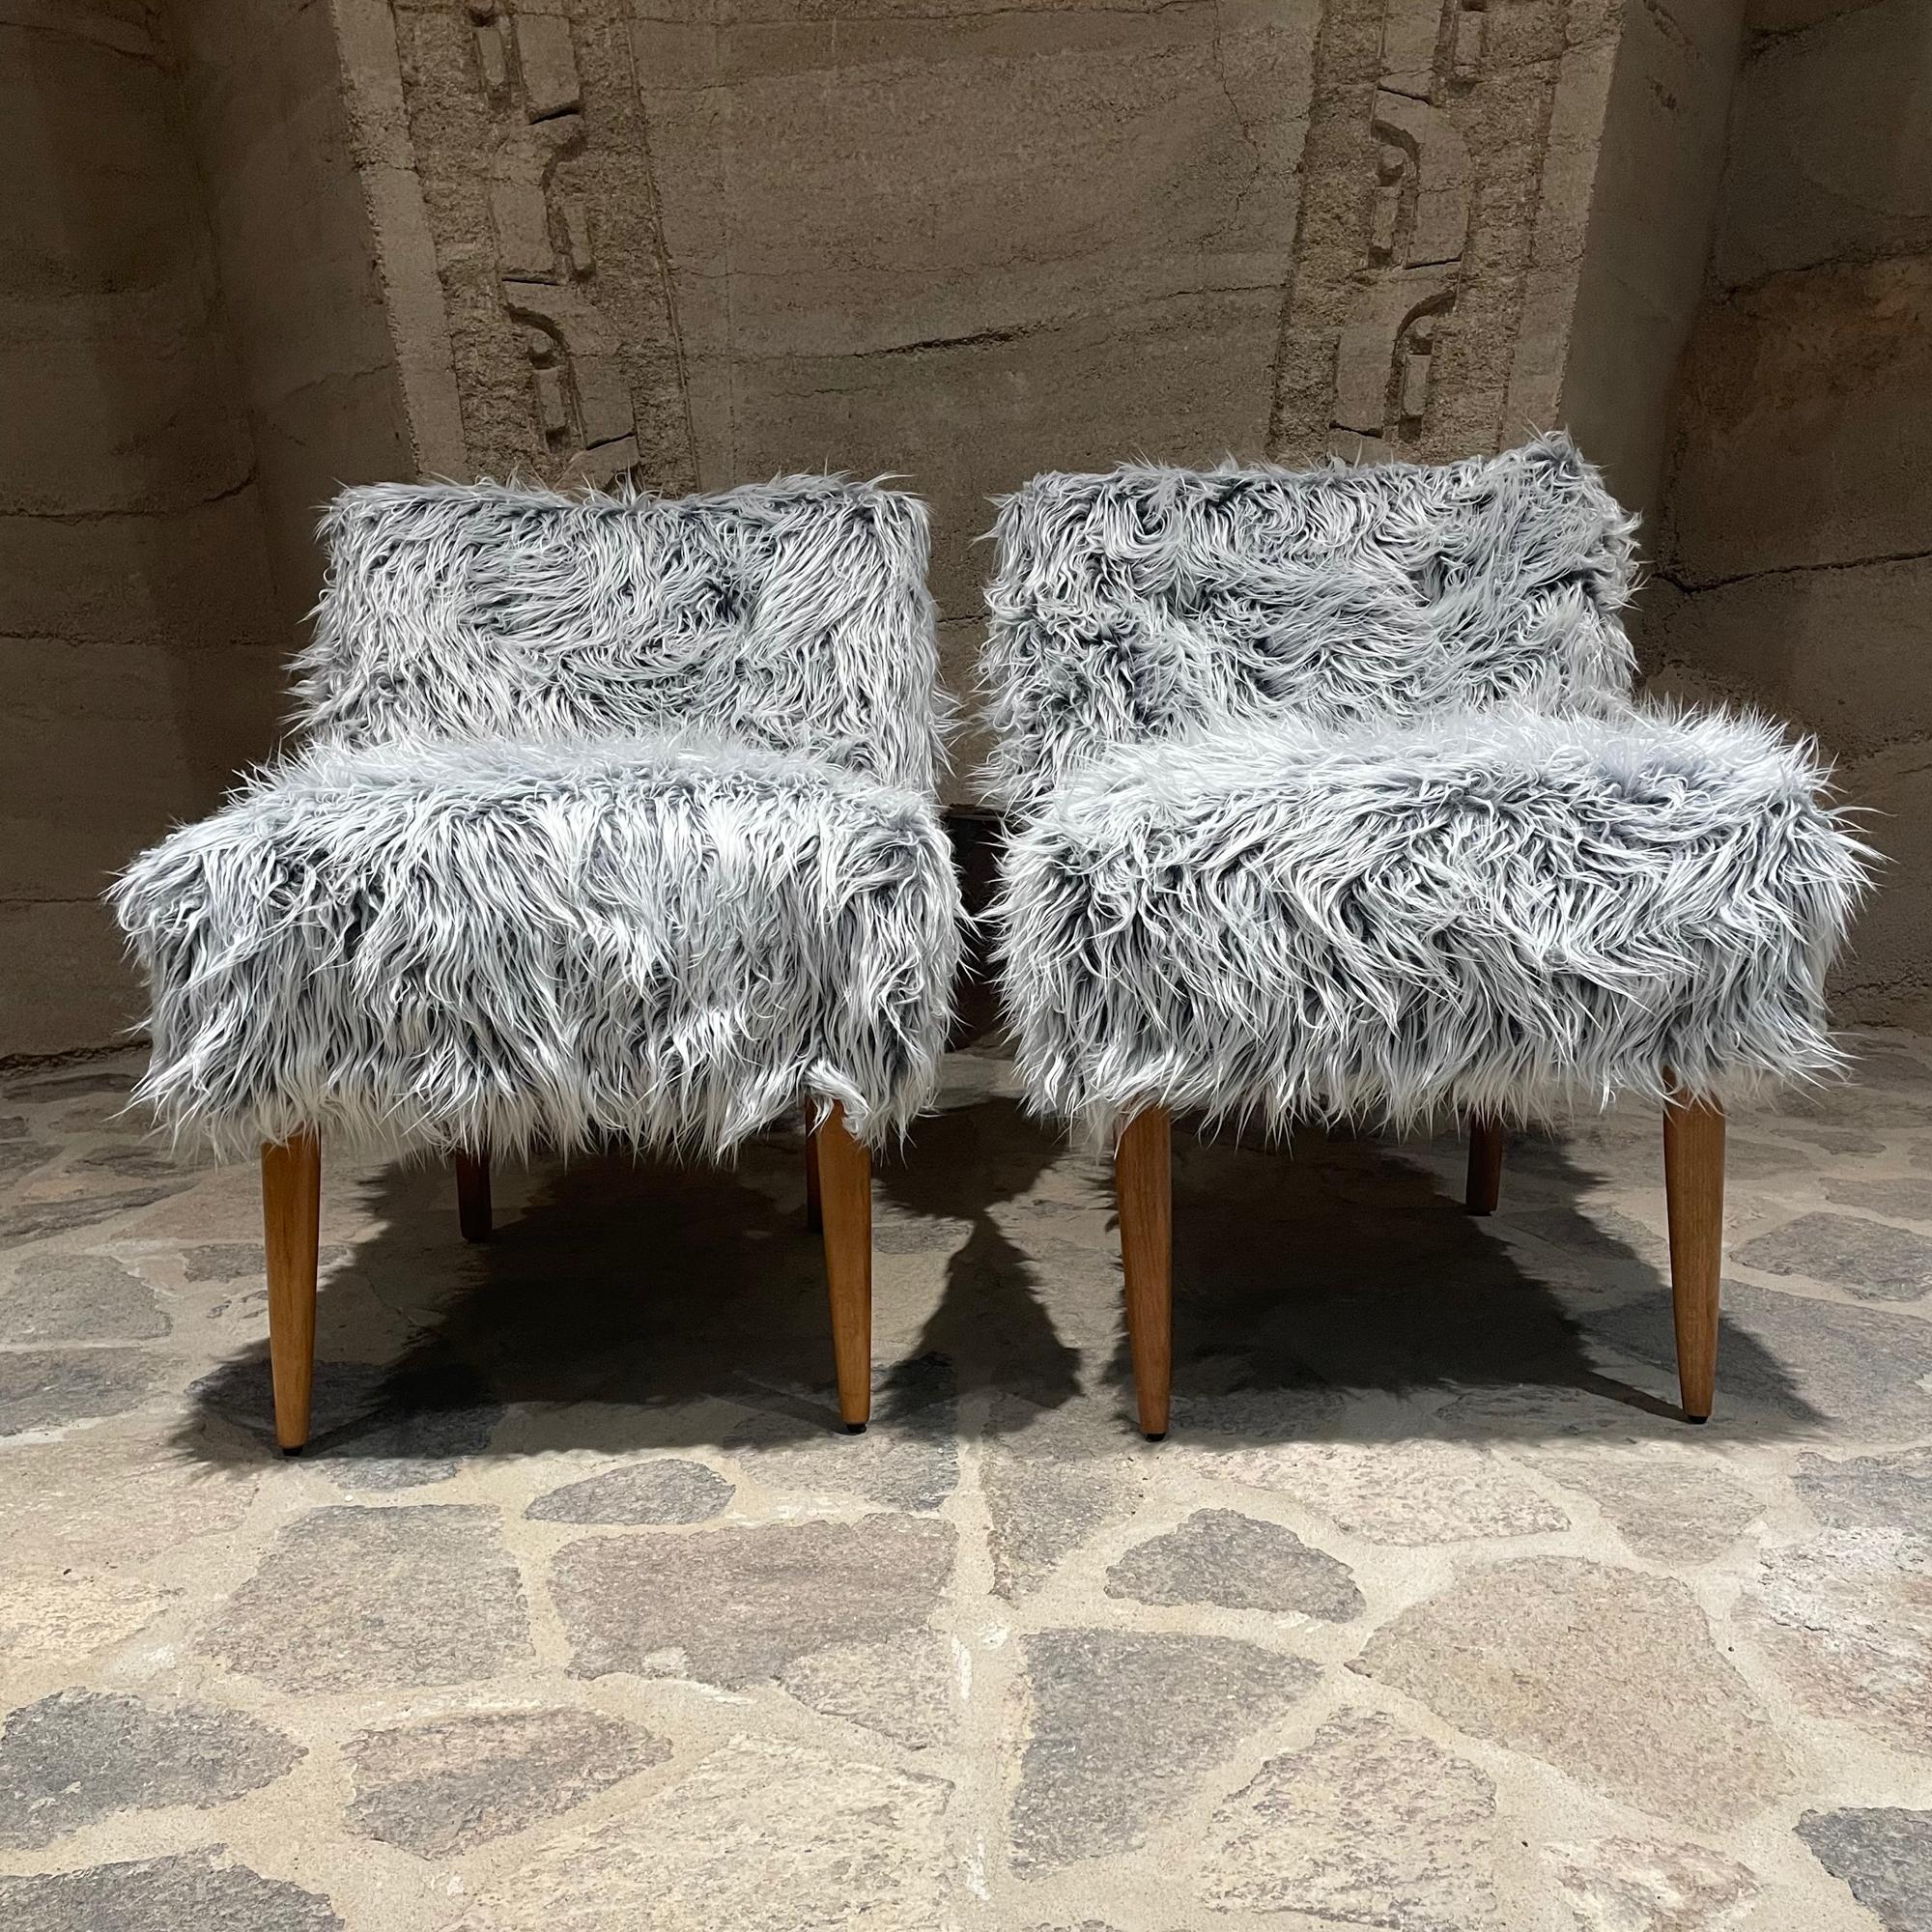 Side slipper chair pair 1950s
Attributed to Billy Haines. Unmarked.
Set of two freshly upholstered sassy slipper side chairs
Fabulous flair and furry comfort to boot.
Measures: 30 tall x 26 D x 22.5 W Seat 20 inches
Preowned Vintage pieces